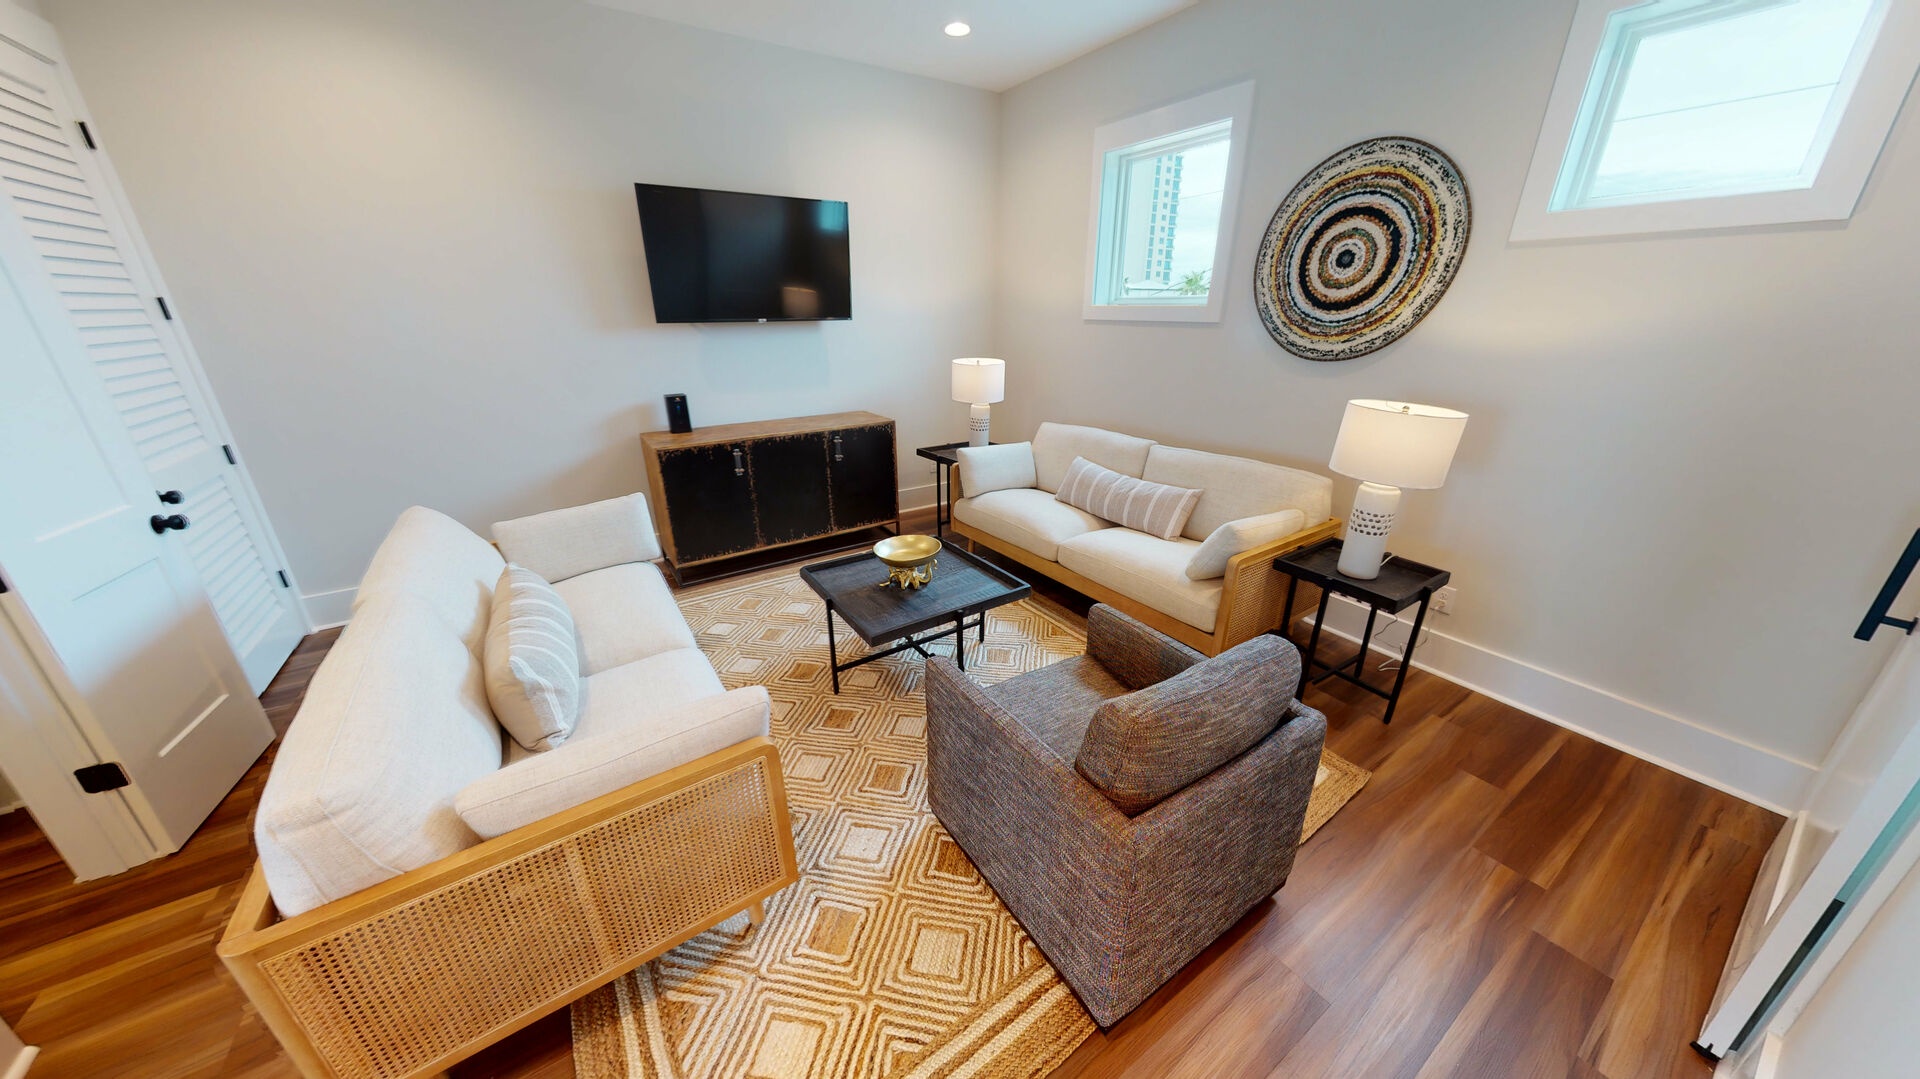 This living area provides comfortable seating and a mounted smart TV